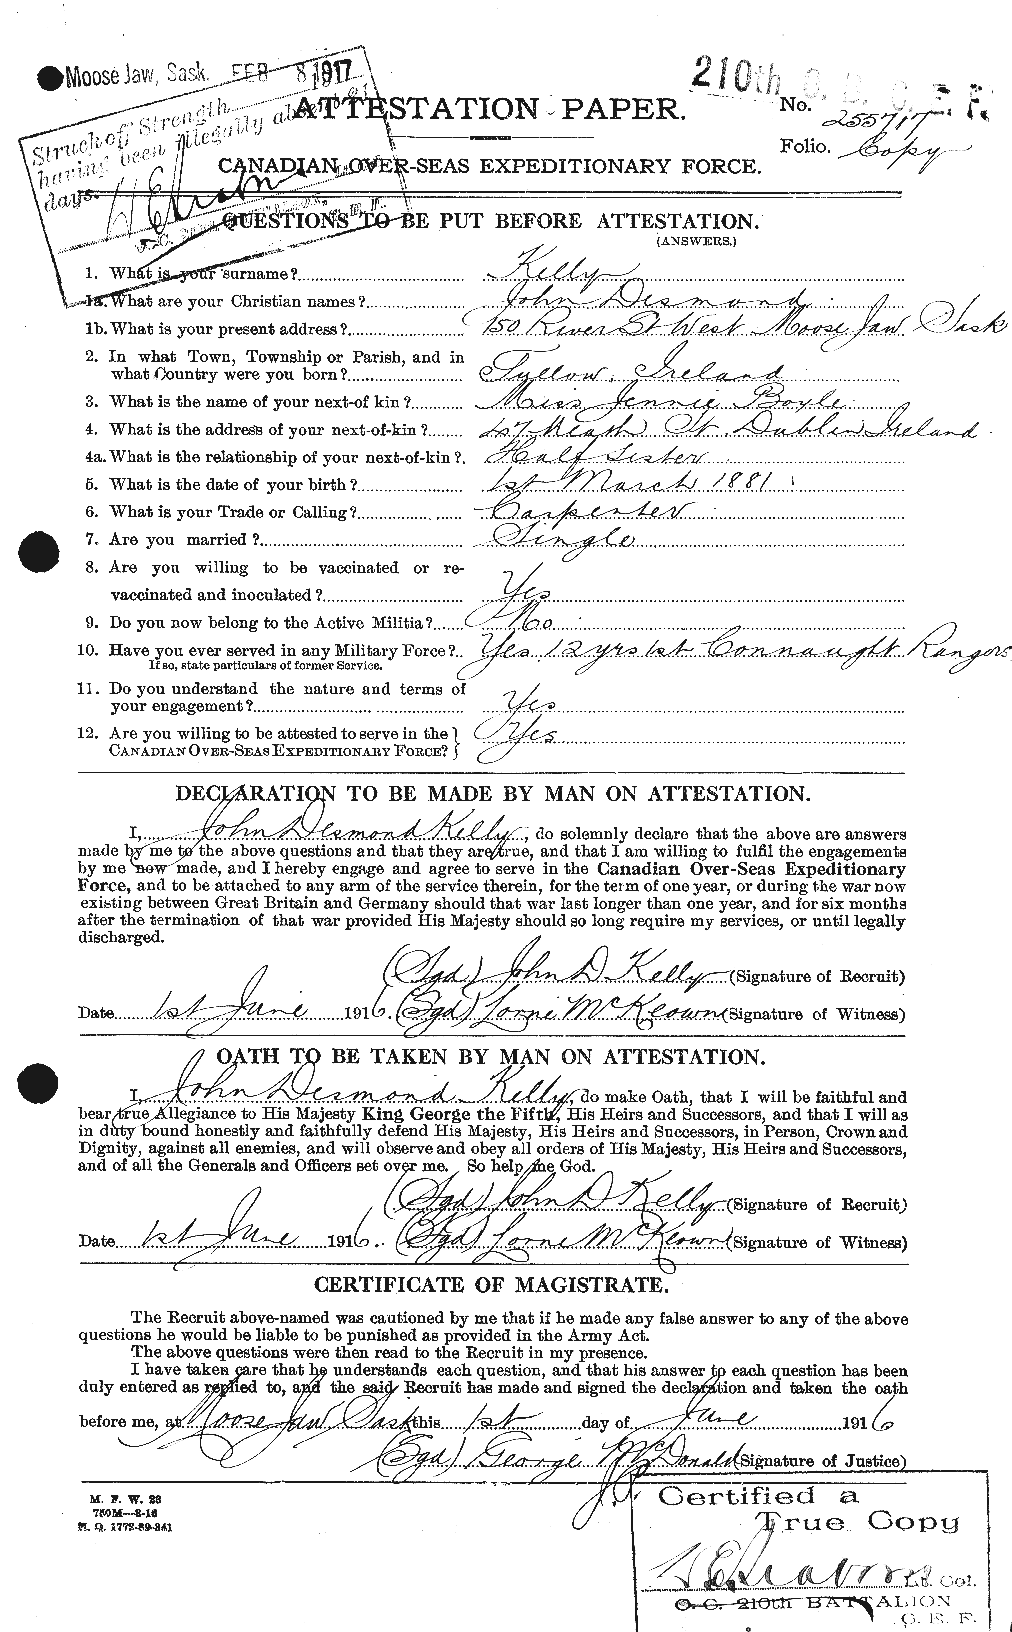 Personnel Records of the First World War - CEF 433539a